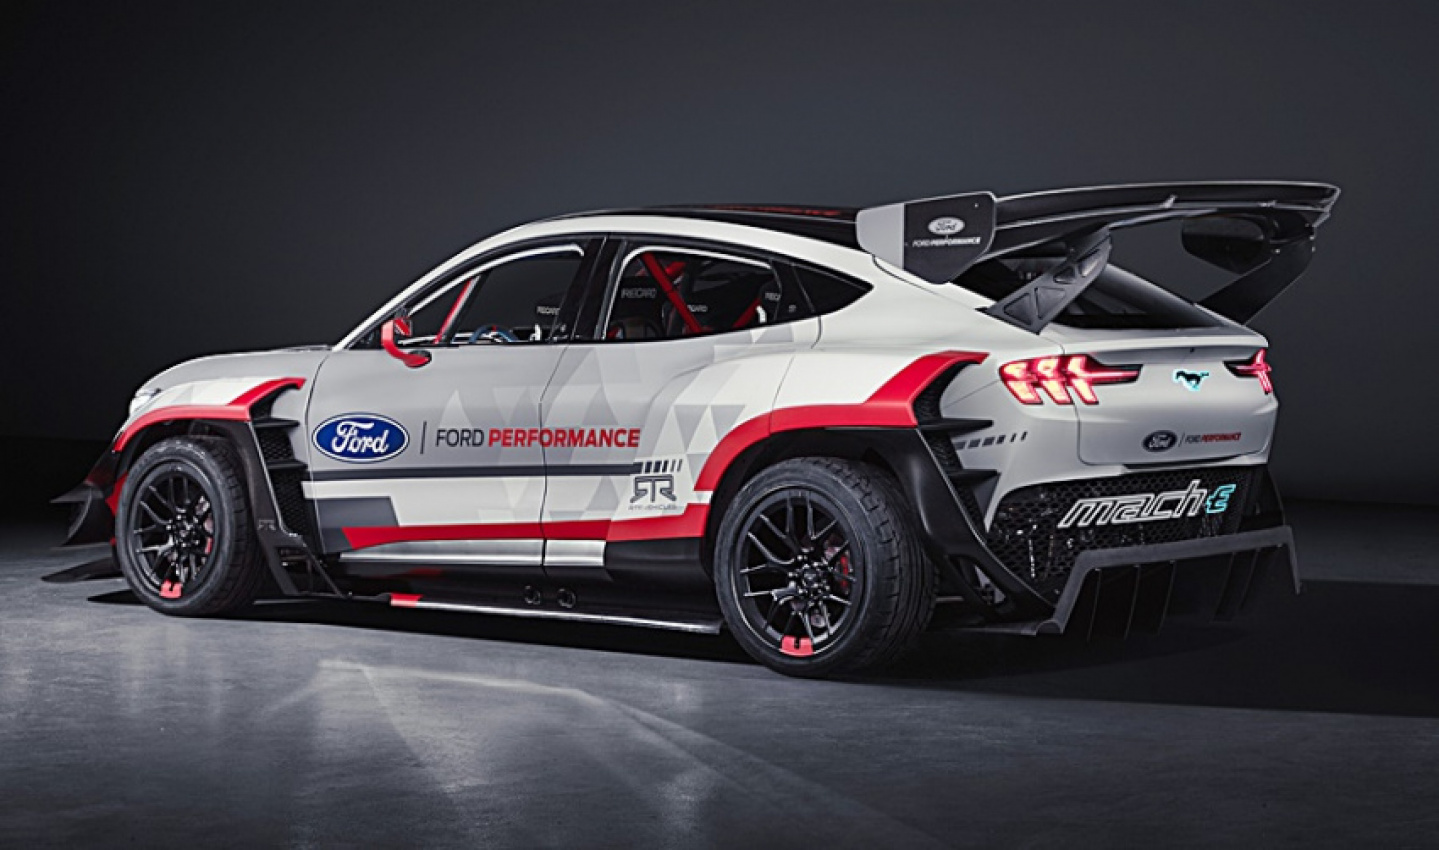 autos, cars, ford, ford mustang, ford mustang mach-e 1400, ford performance, prototype, rtr vehicles, ford mustang mach-e 1400 generates 1,400 horsepower! (w/video)